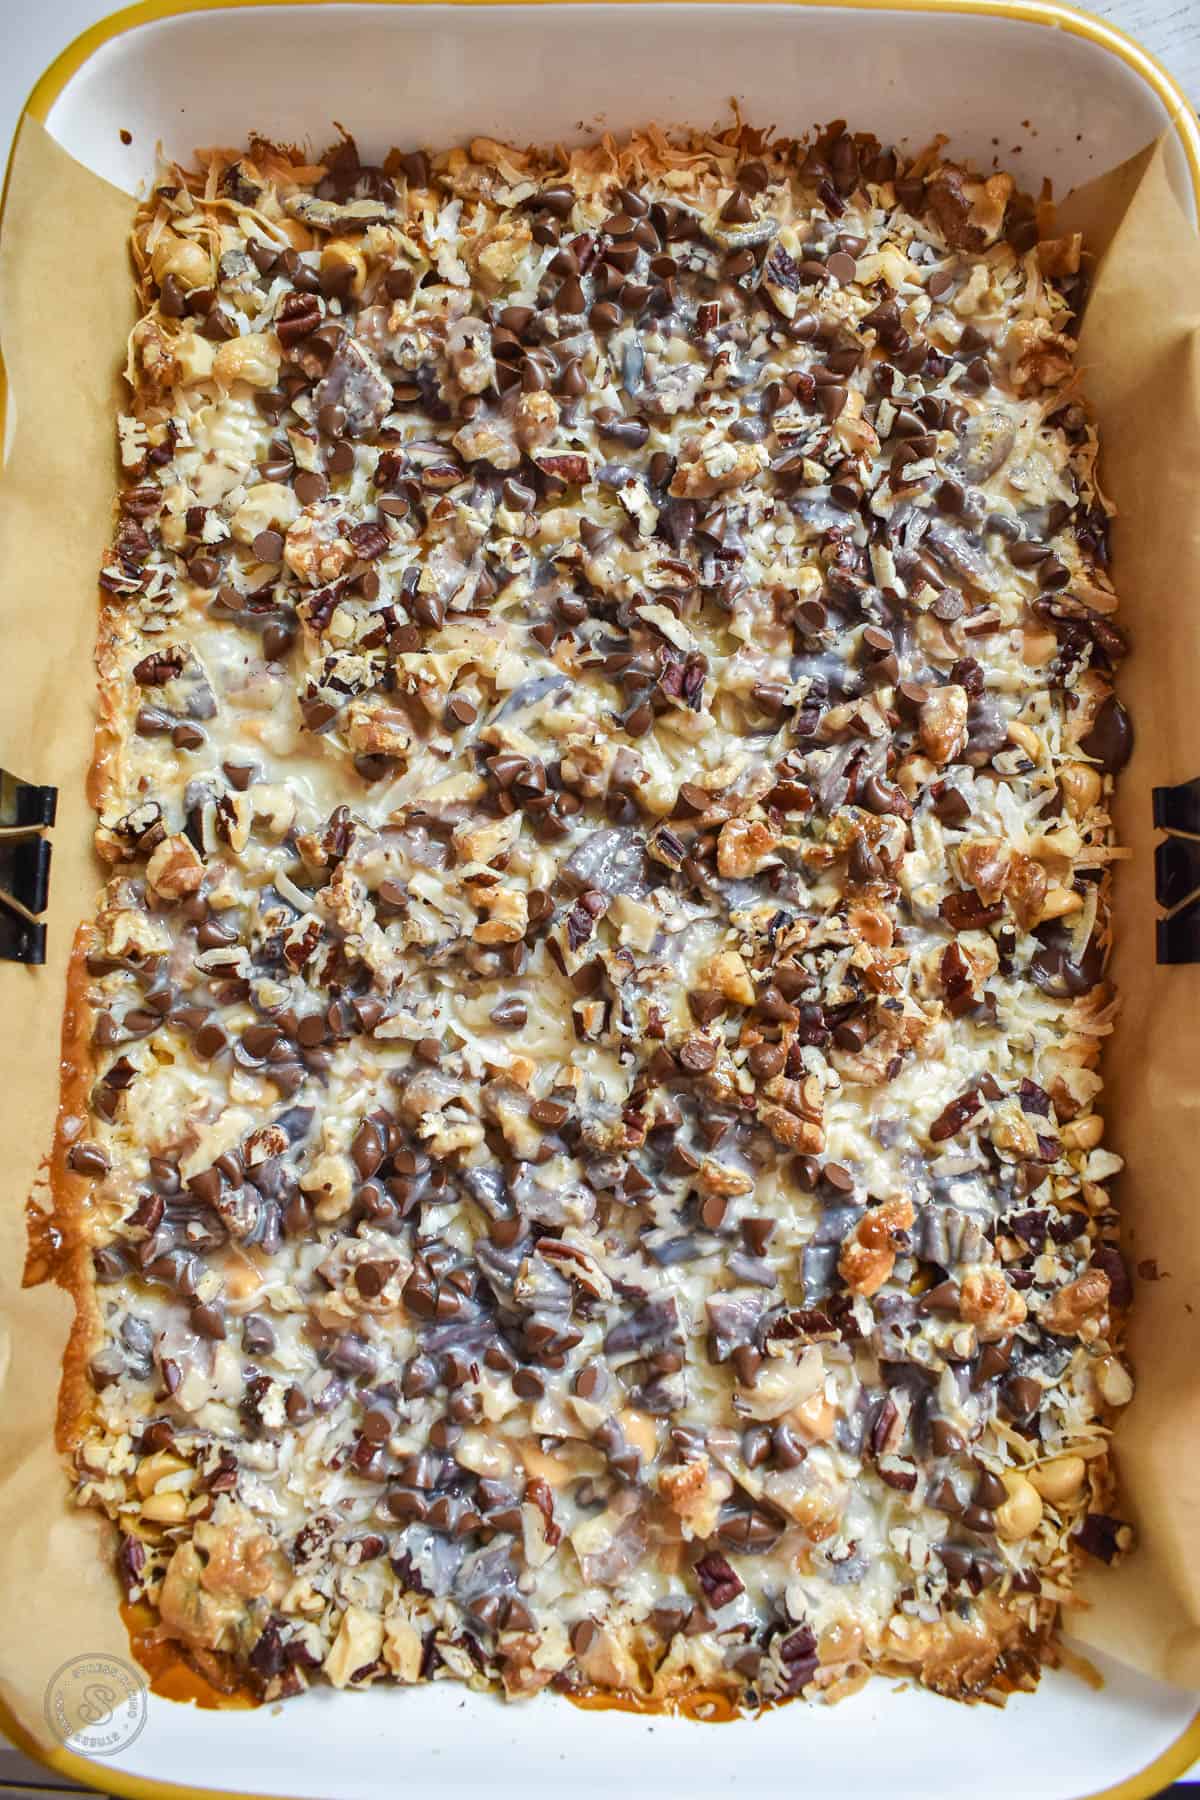 Magic cookie bars fresh out of the oven with melted chocolate and toasted nuts on top